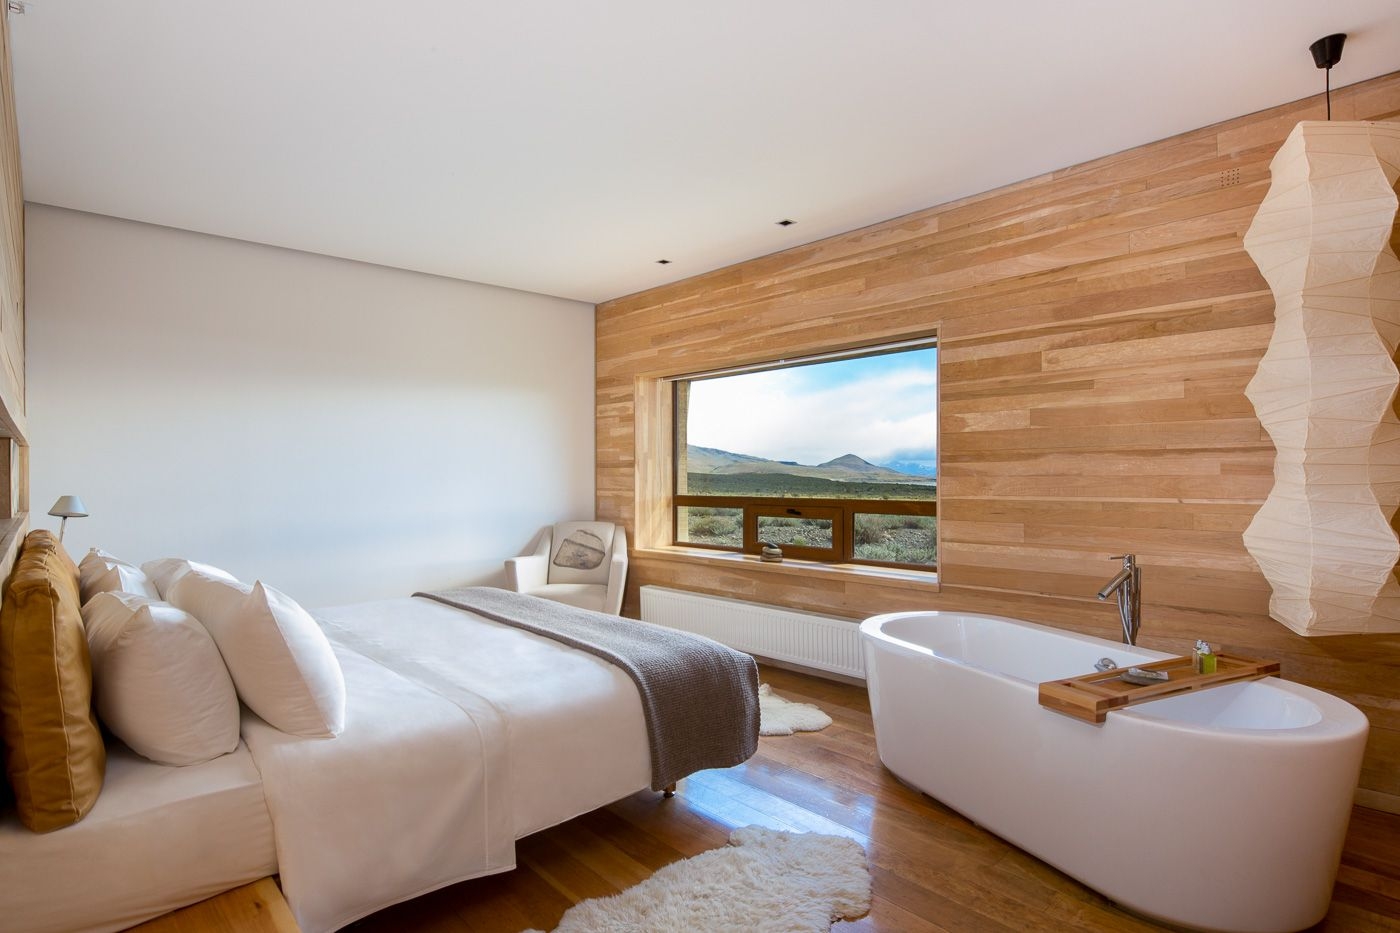 Double bedroom with bathtub and mountain views at Tierra Patagonia, Chile